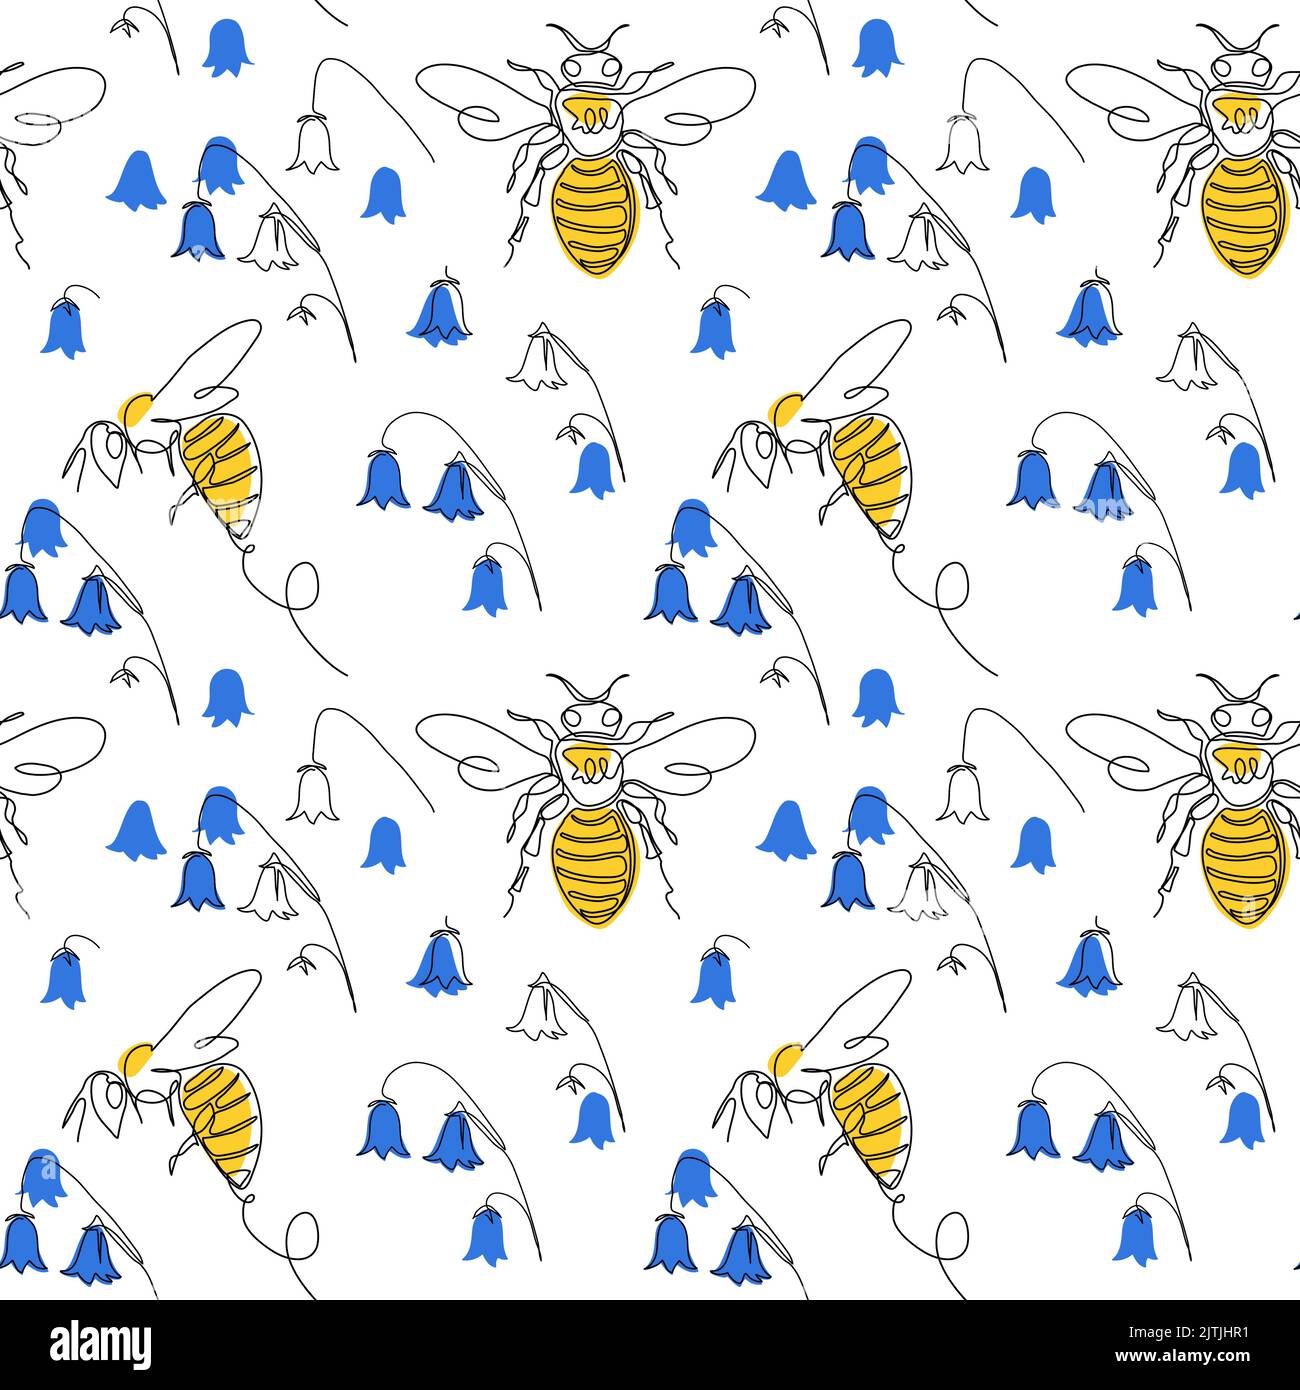 Bee vector pattern, background with blue flowers Stock Vector